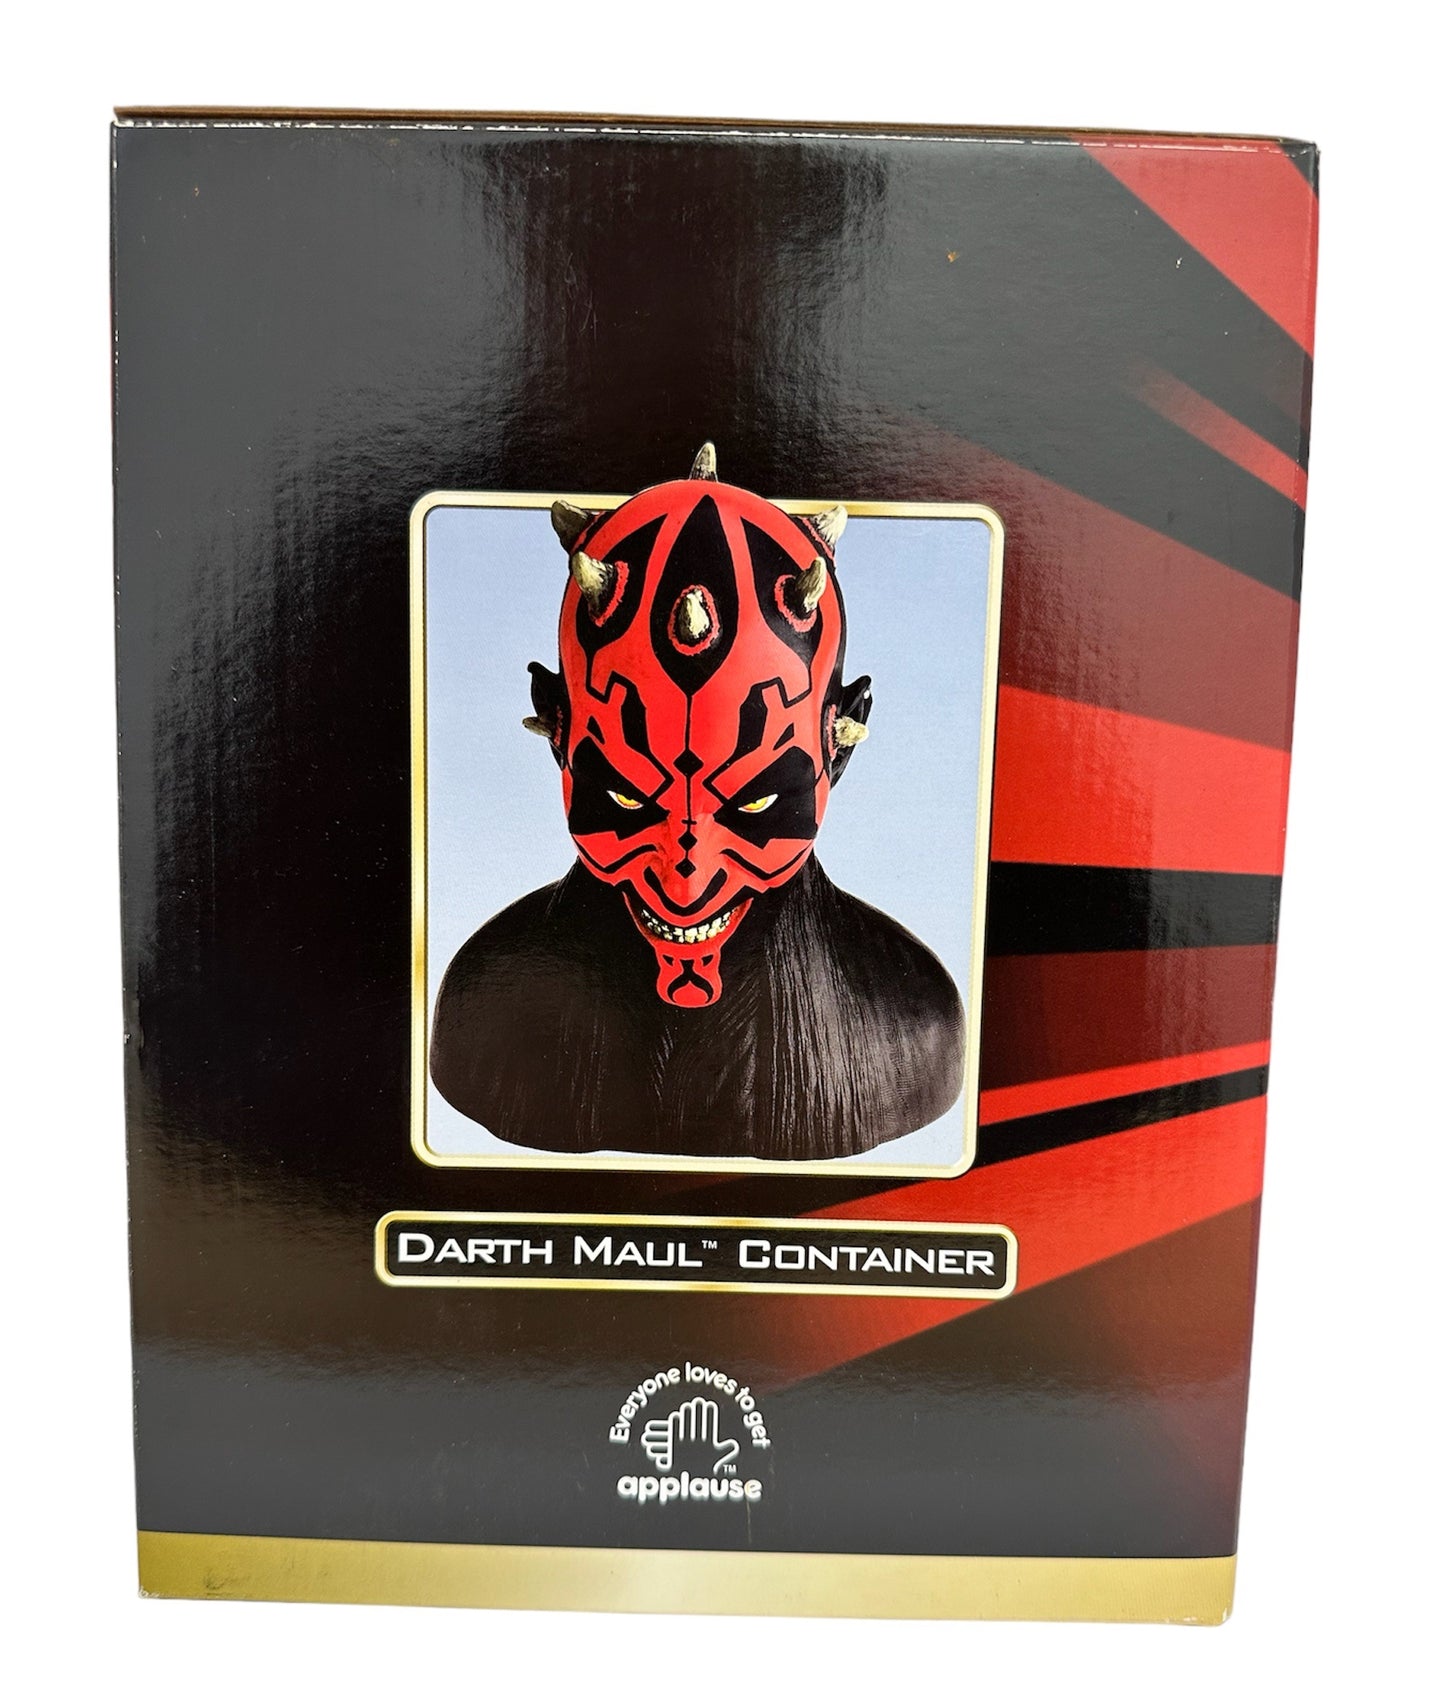 Vintage 1999 Star Wars Episode 1 Darth Maul Head And Shoulders Plastic Container - Brand New Factory Sealed Shop Stock Room Find